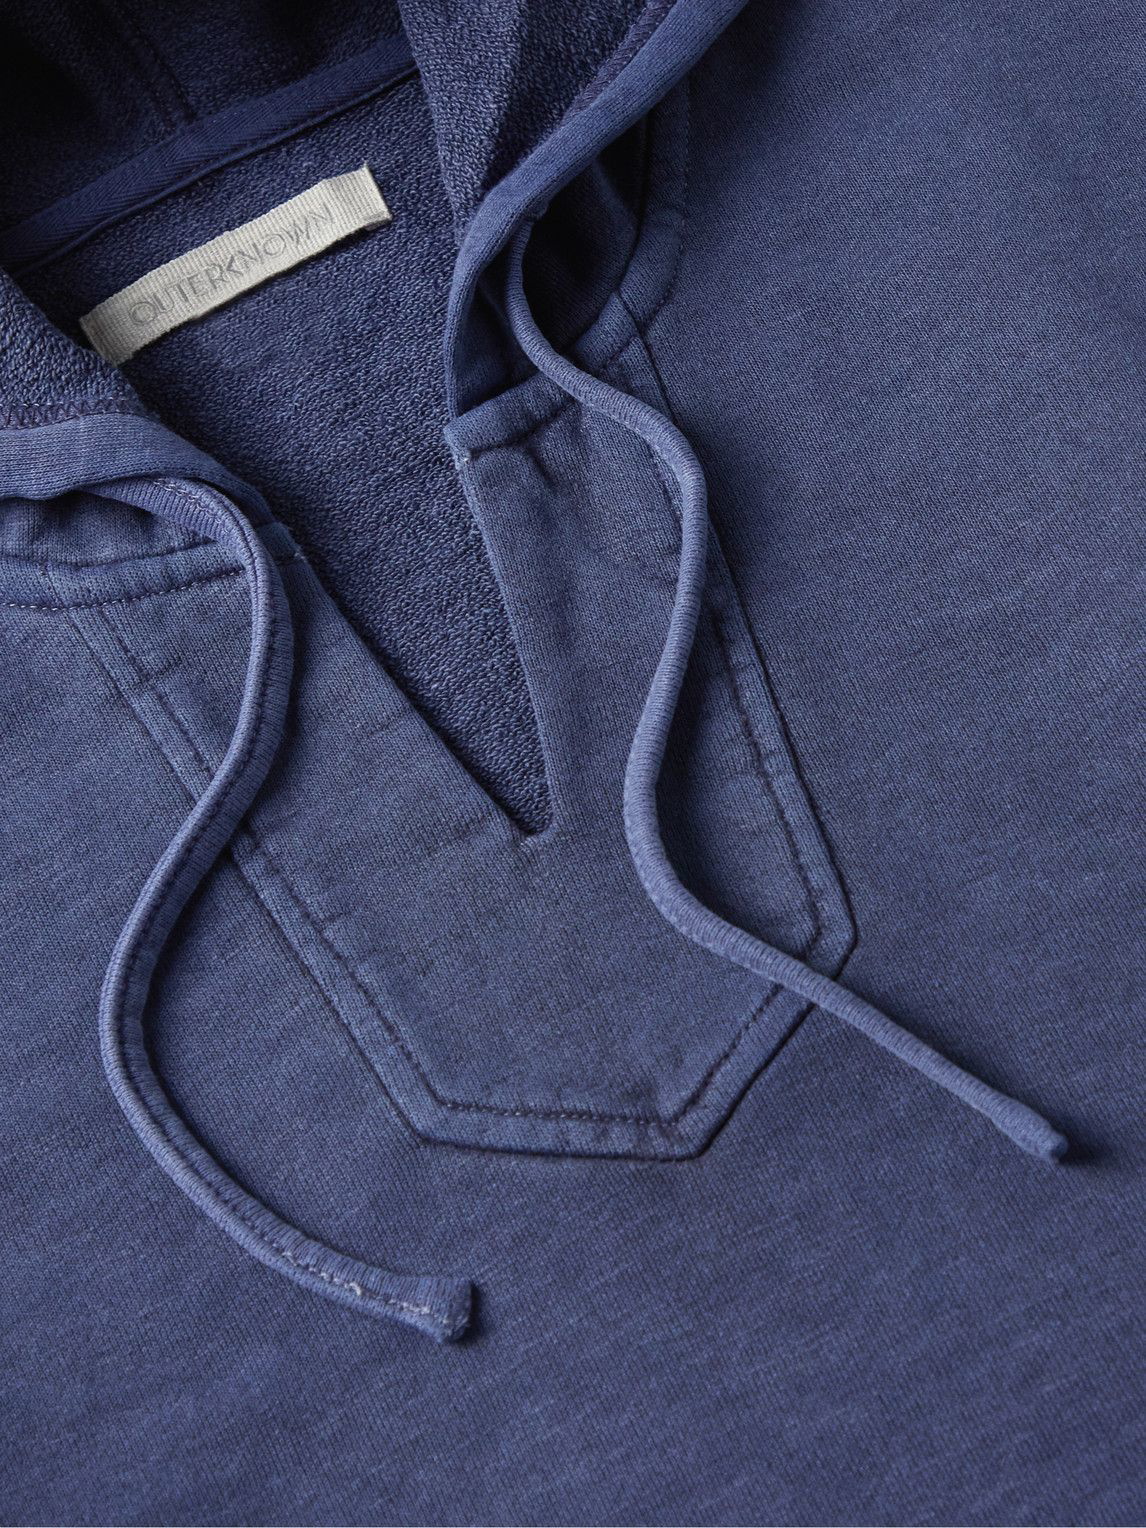 Outerknown - Sur Baja Hemp and Organic Cotton-Blend Hoodie - Blue Outerknown